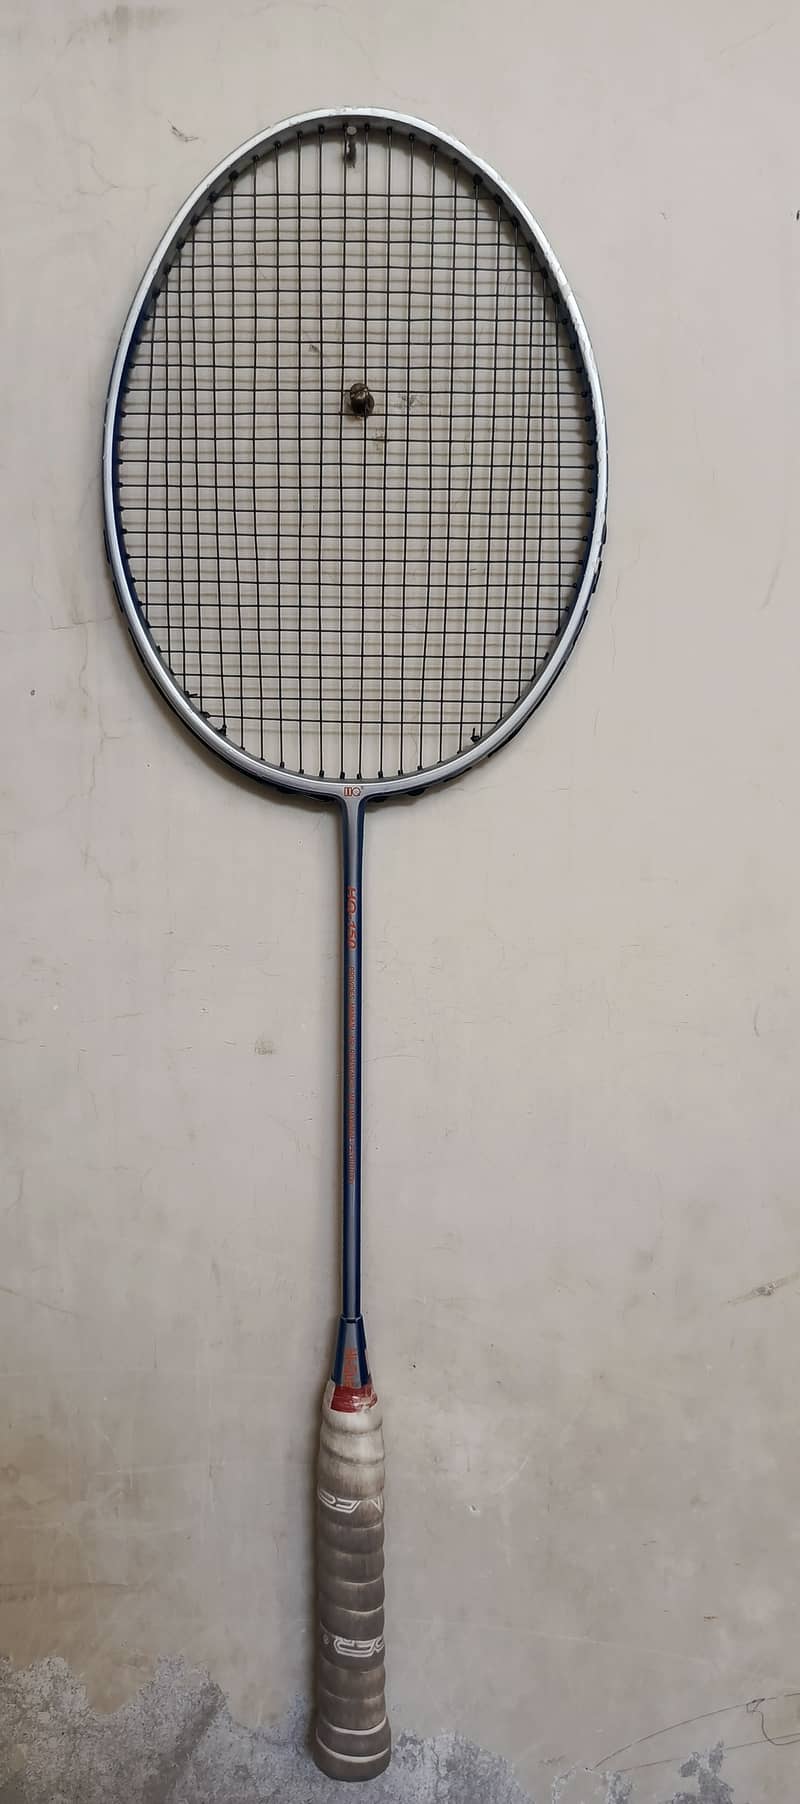 Badminton Racket | Hiqua 150 made in USA weight 84 tension 28 lbs 1